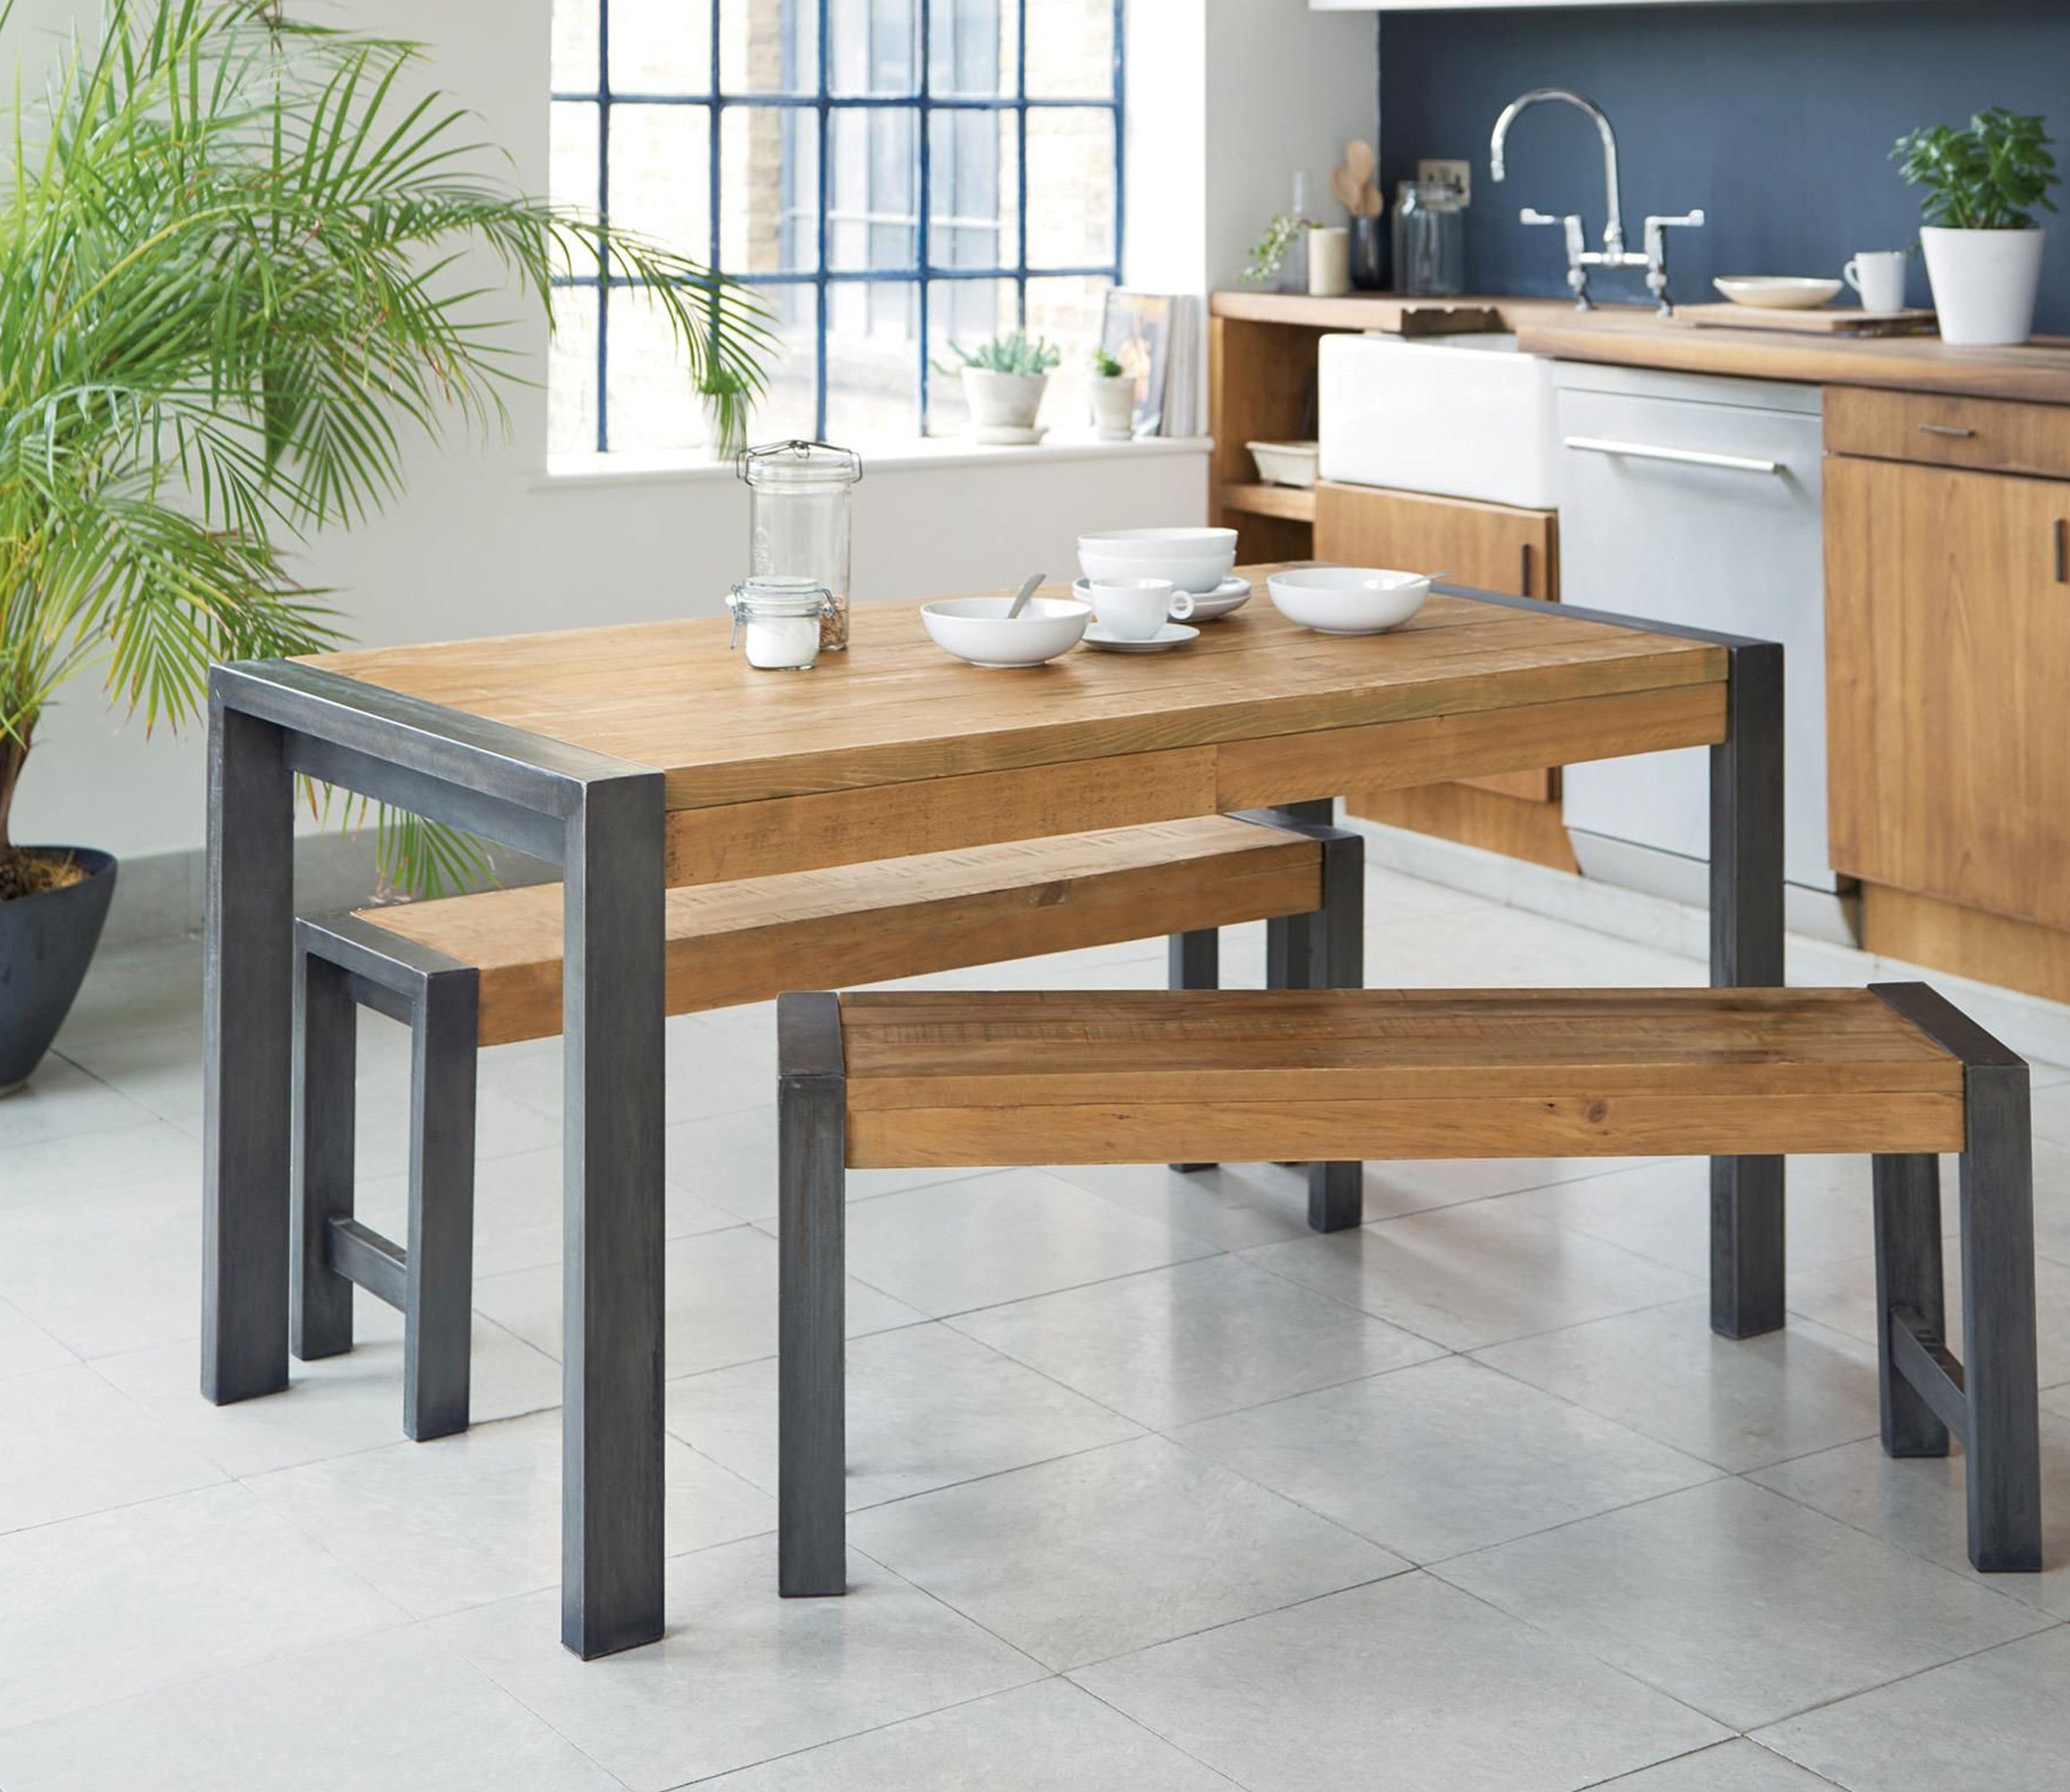 Cafe Style Breakfast Table 